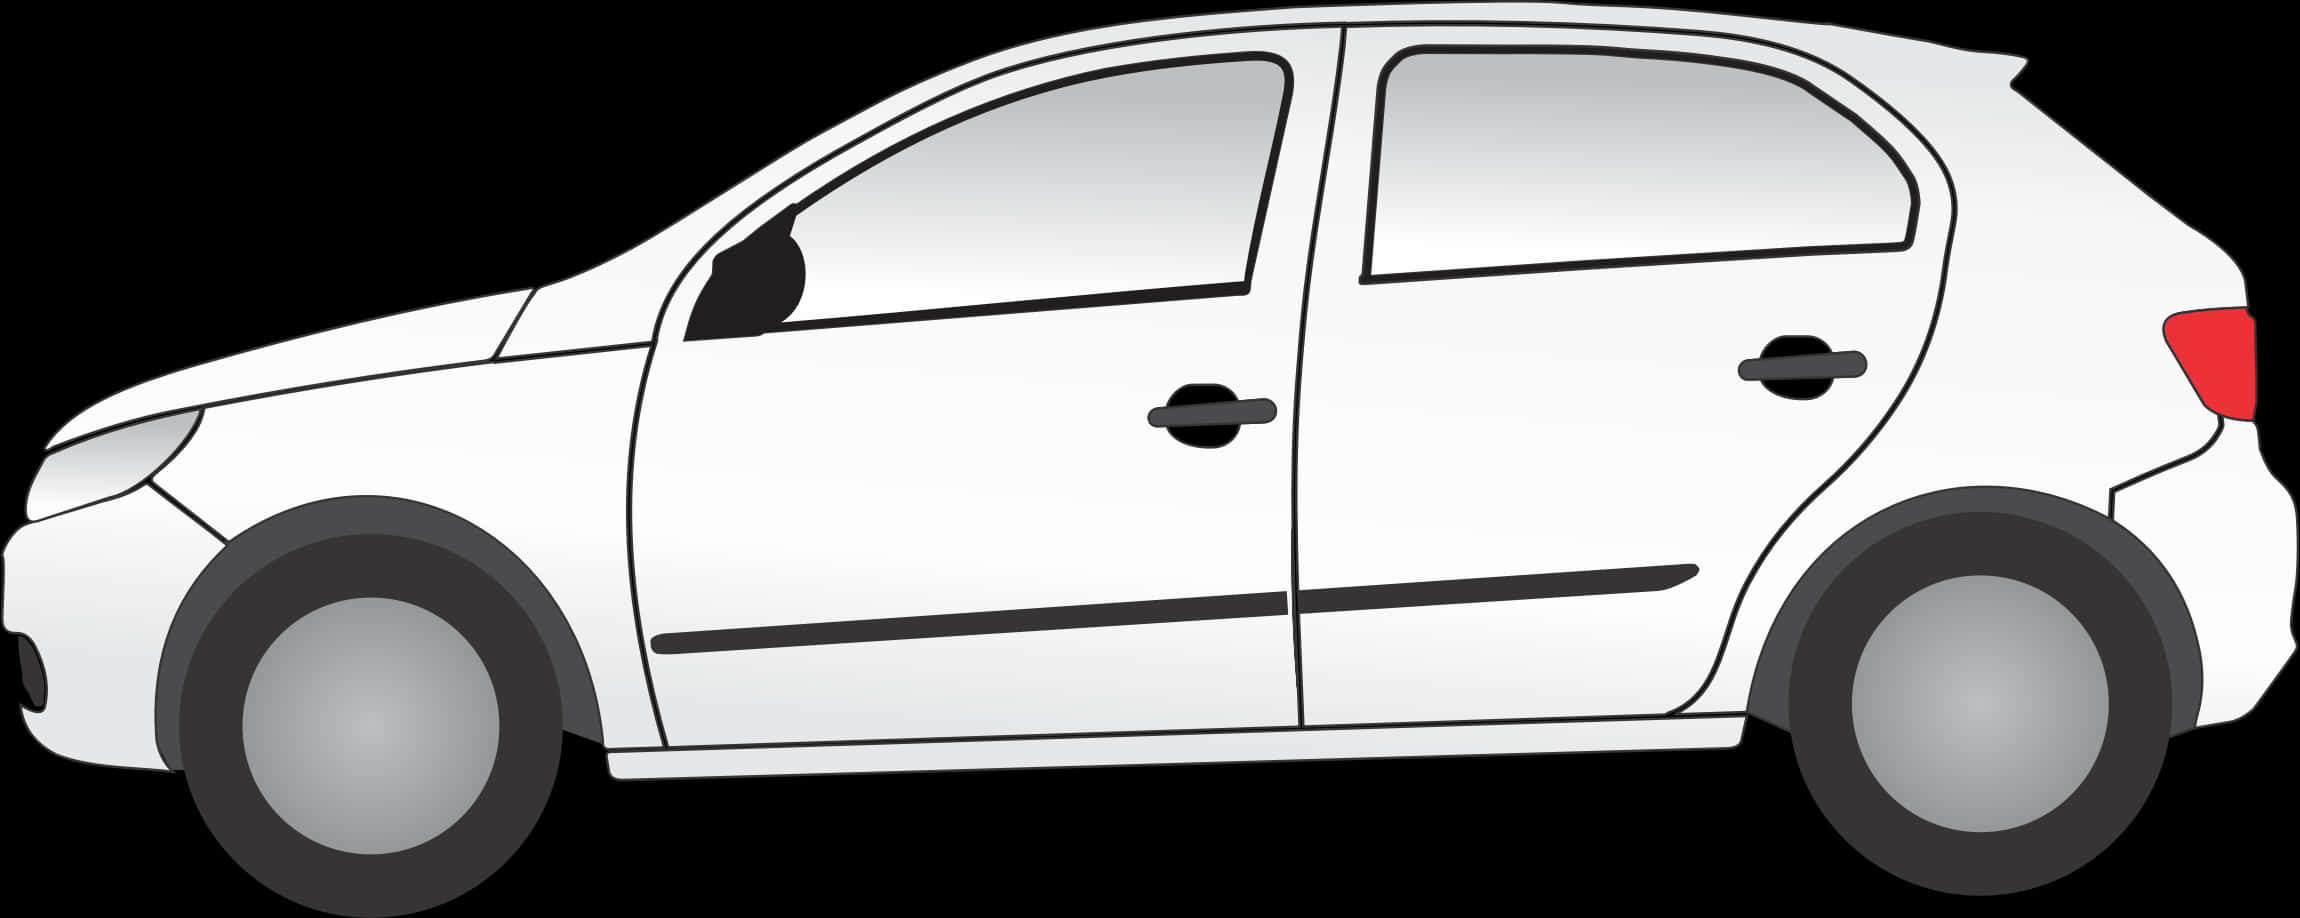 White Hatchback Car Side View Vector